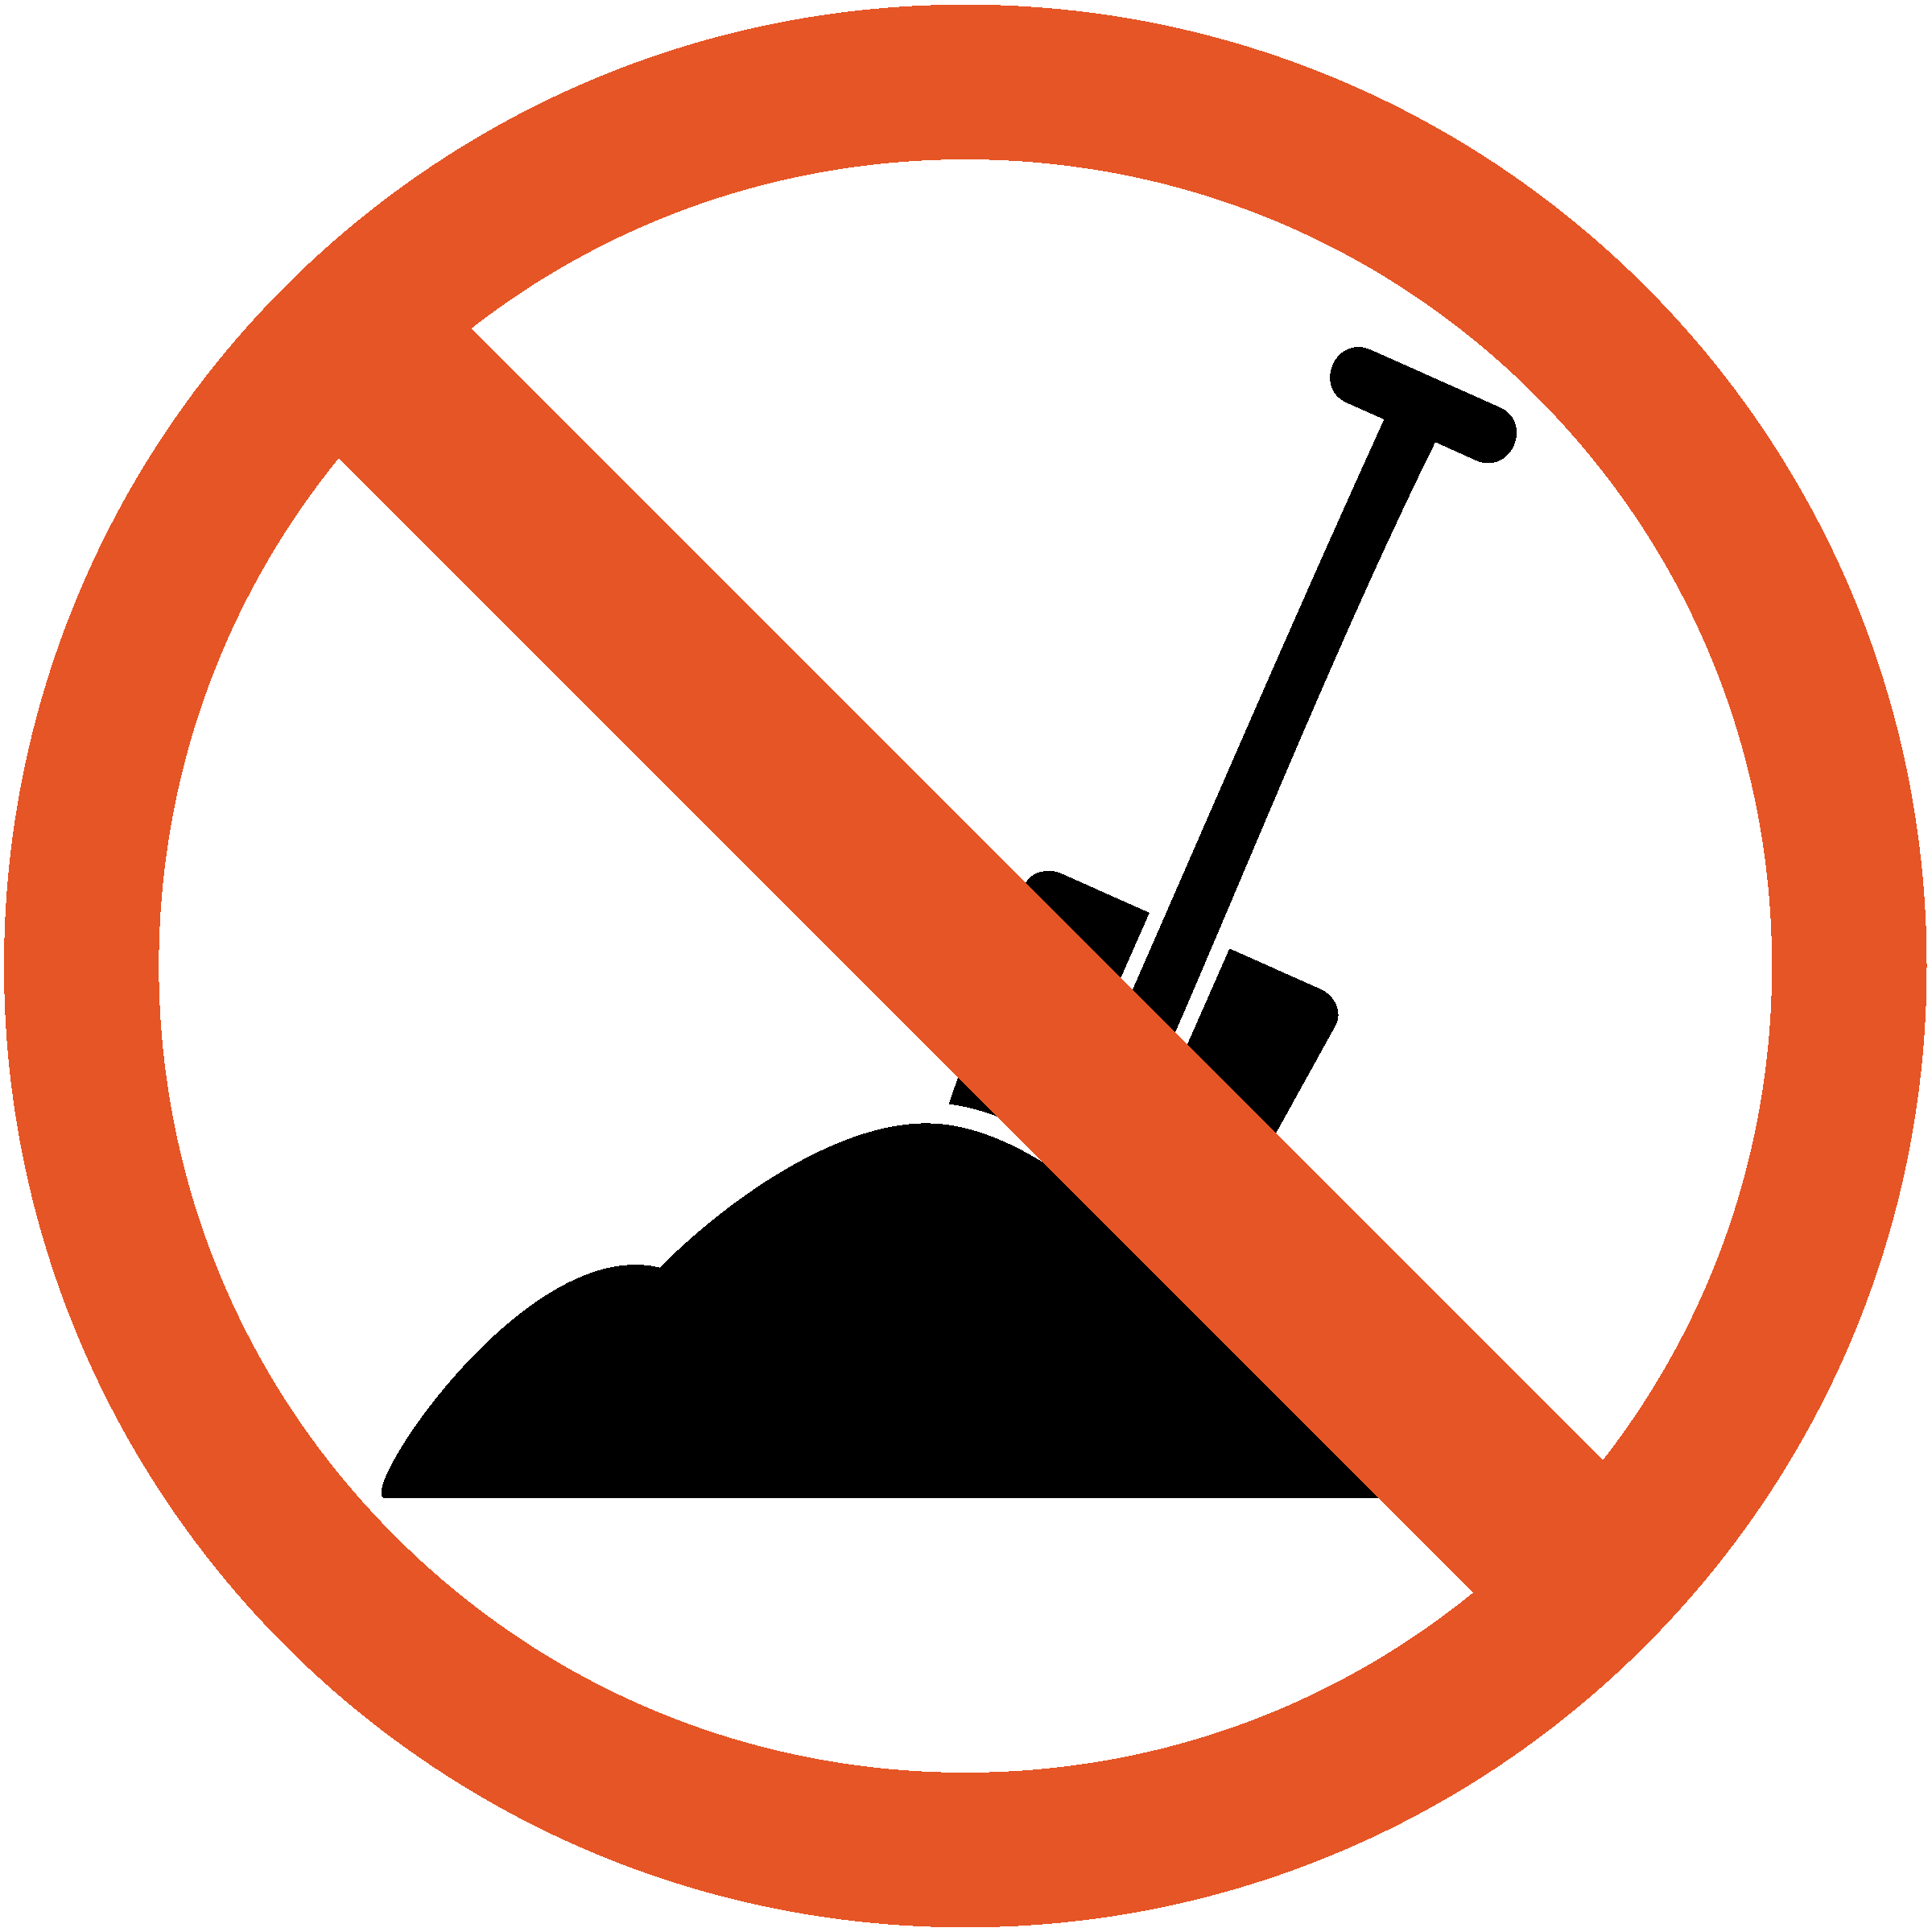 icon of no symbol over shovel positioned in pile of dirt